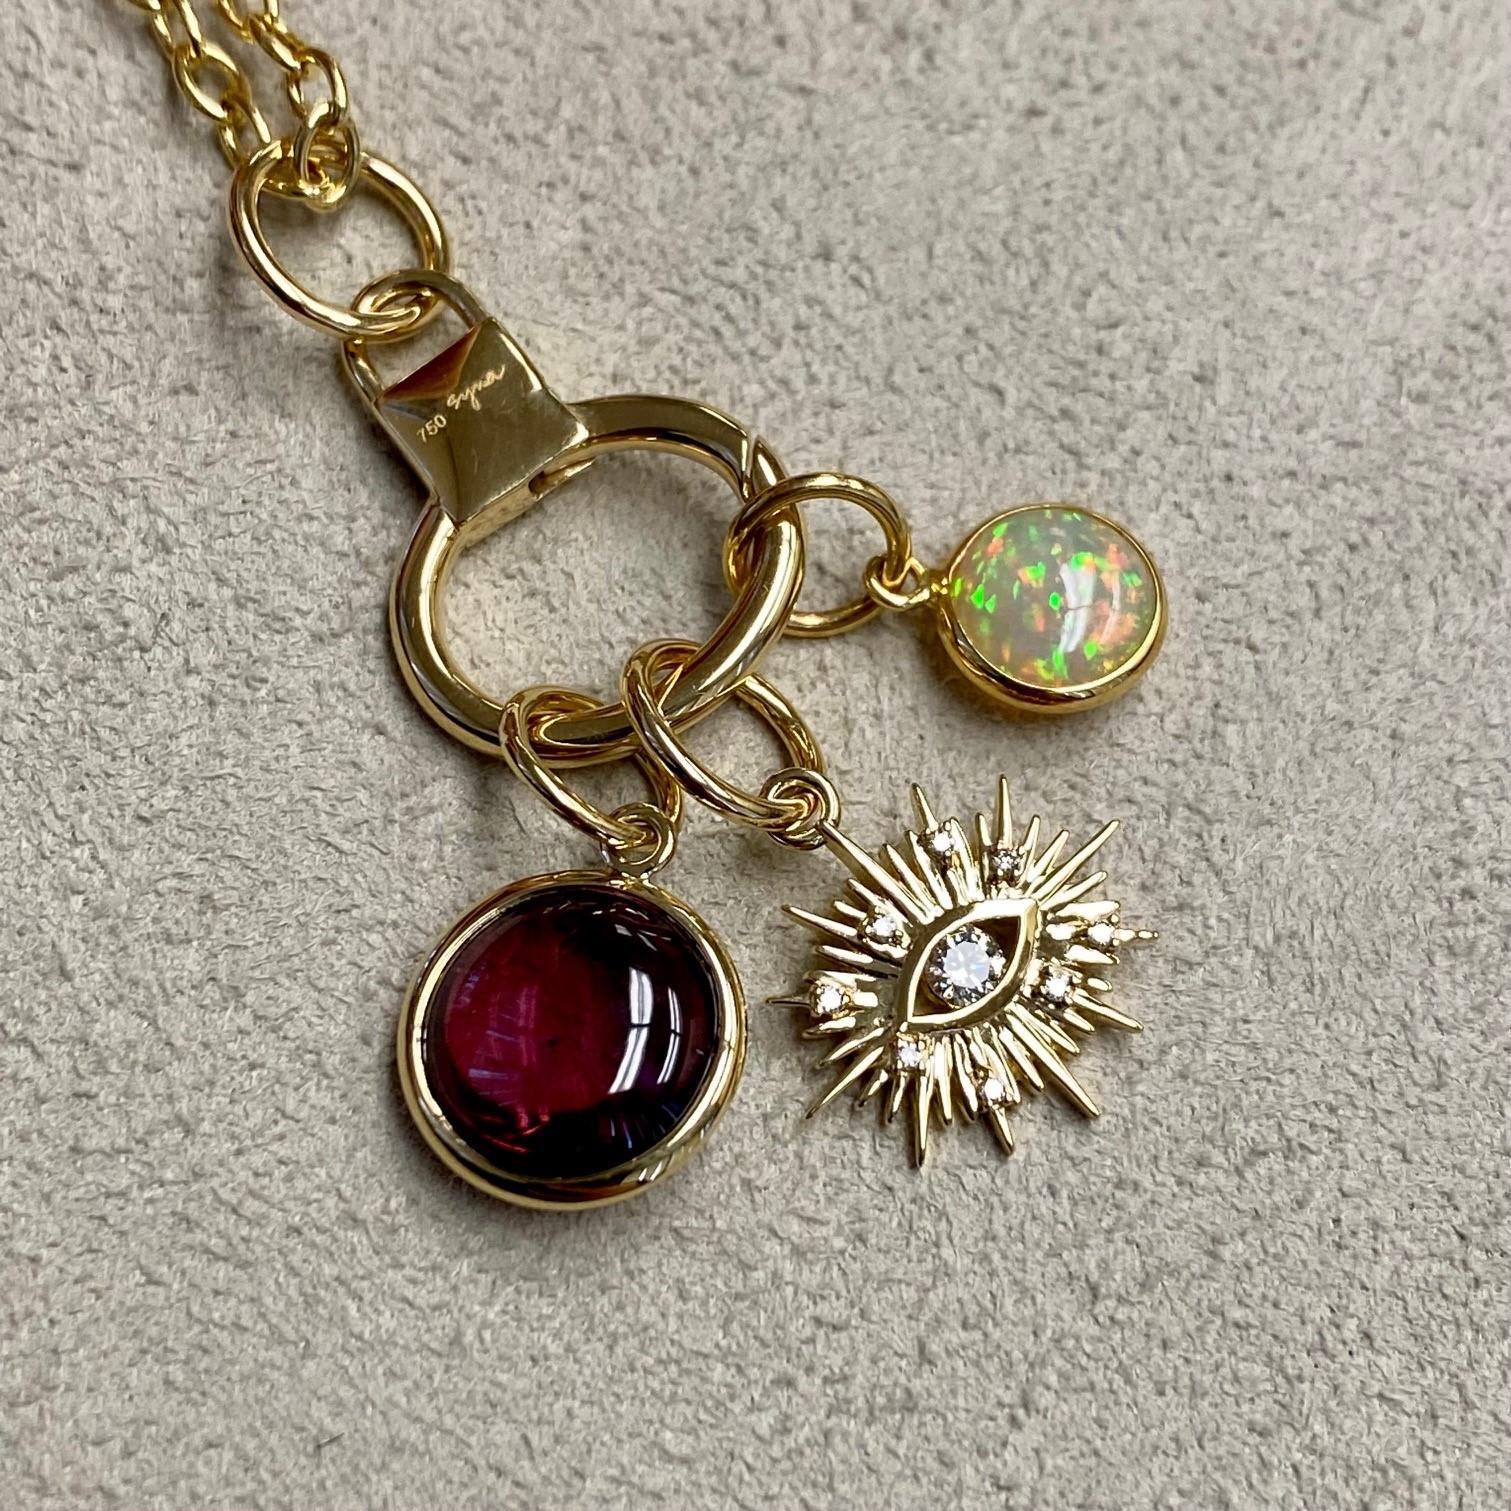 Created in 18 karat yellow gold
Rhodolite garnet 3.50 carats approx.
Opal 0.80 carat approx.
Diamonds 0.10 carat approx.
Limited edition
Chain sold separately

Hand-crafted from 18 karat yellow gold, this limited-edition Three charms features a